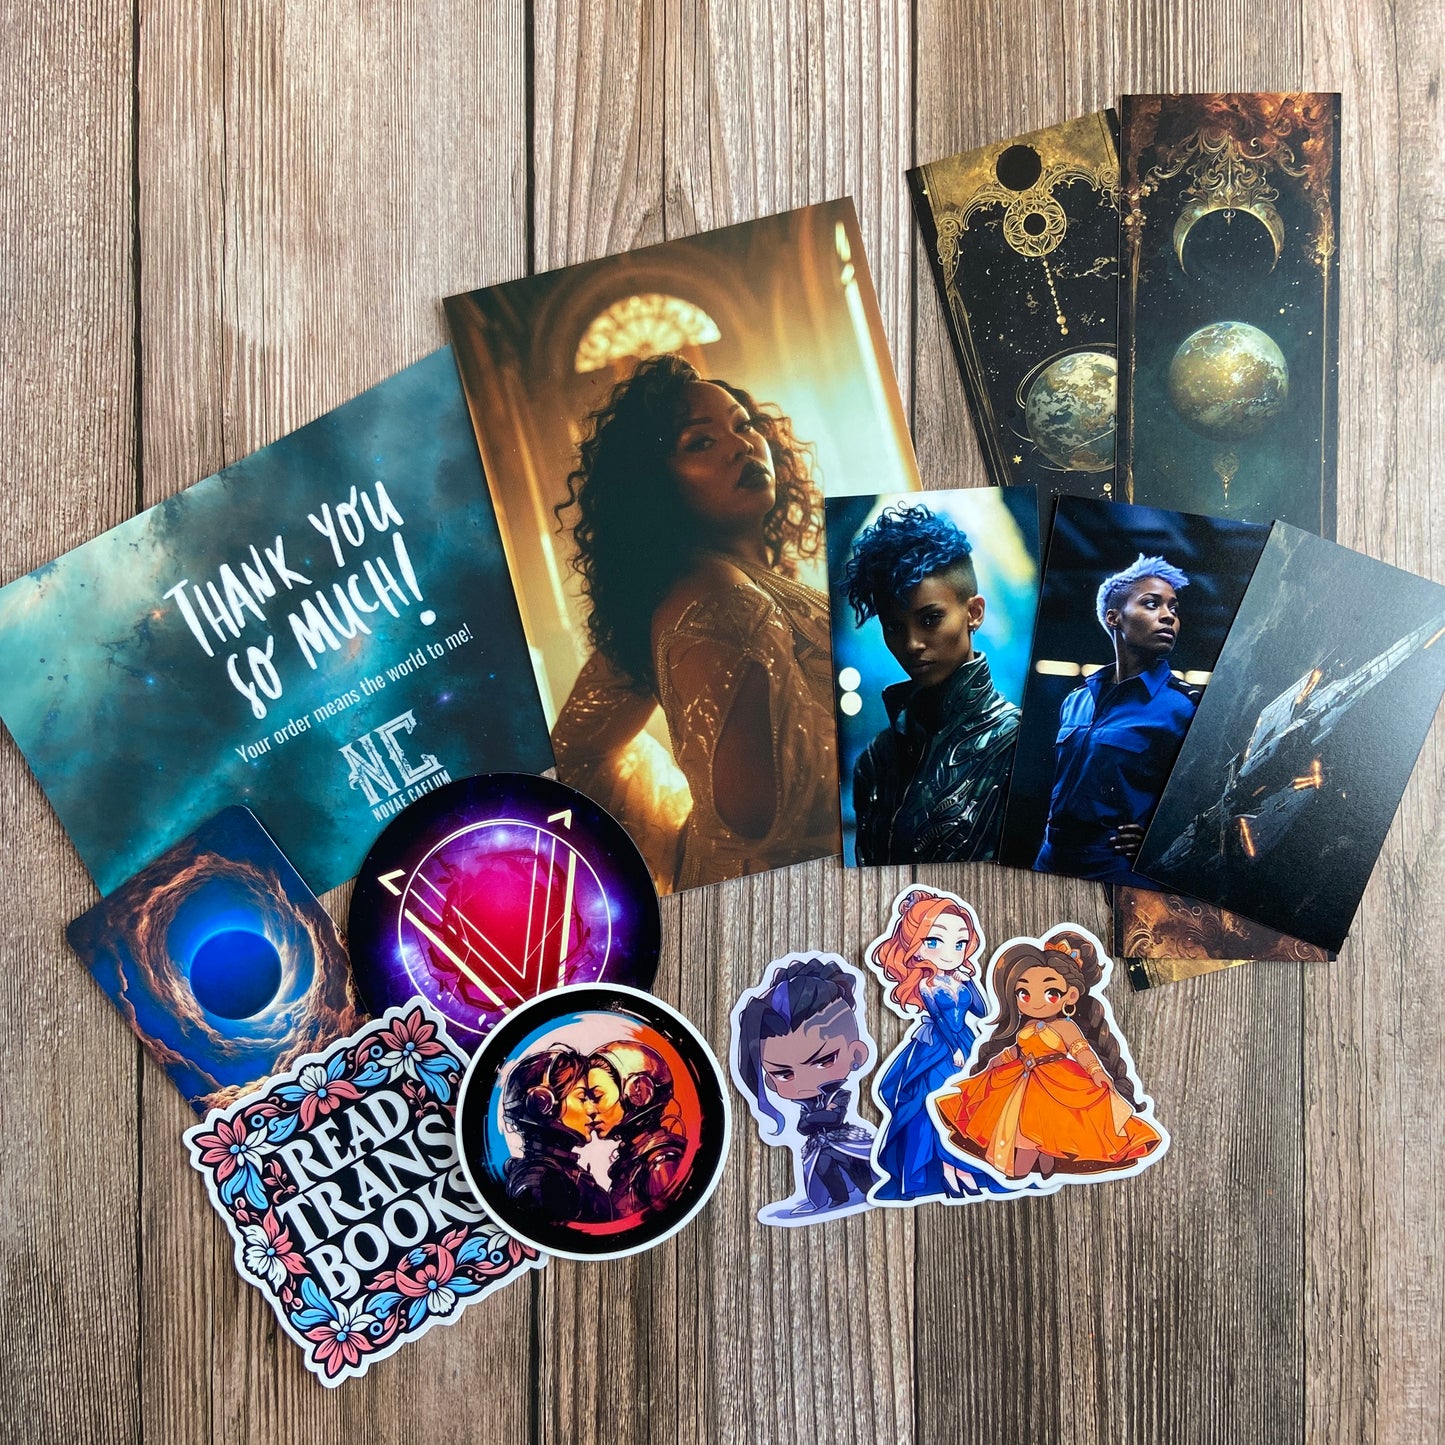 A collection of swag (cards, vinyl stickers, bookmarks) from Novae Caelum's "The Stars and Green Magics - Books 1-5". This collection is part of the Paperback Deluxe Swag Bundle.